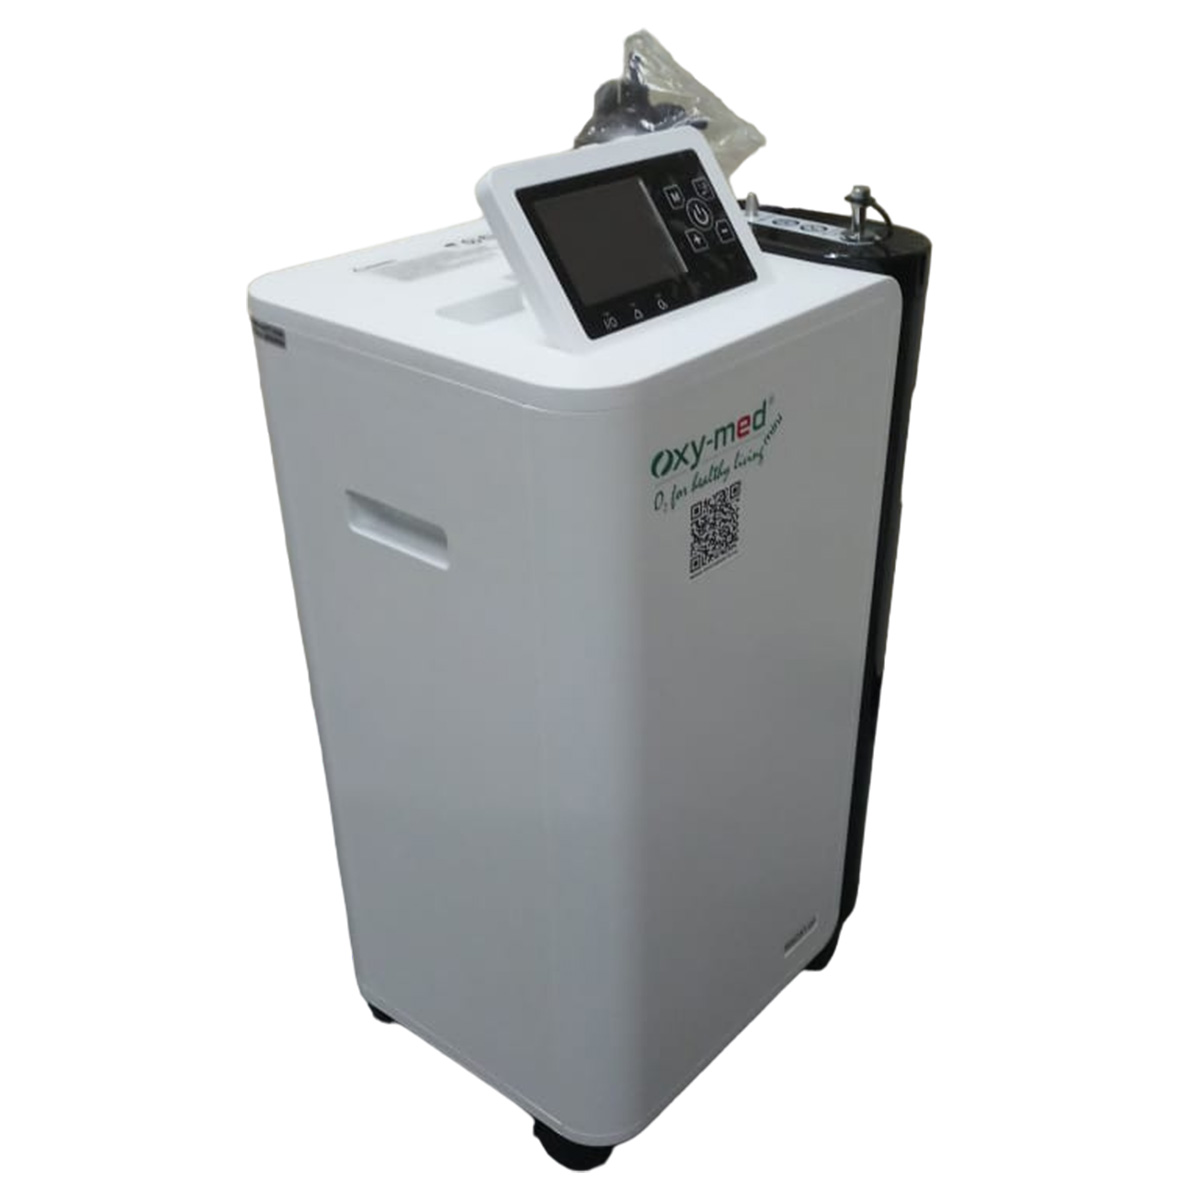 5 Lpm Oxymed Oxygen Concentrator On Sale Suppliers, Service Provider in Dilli haat